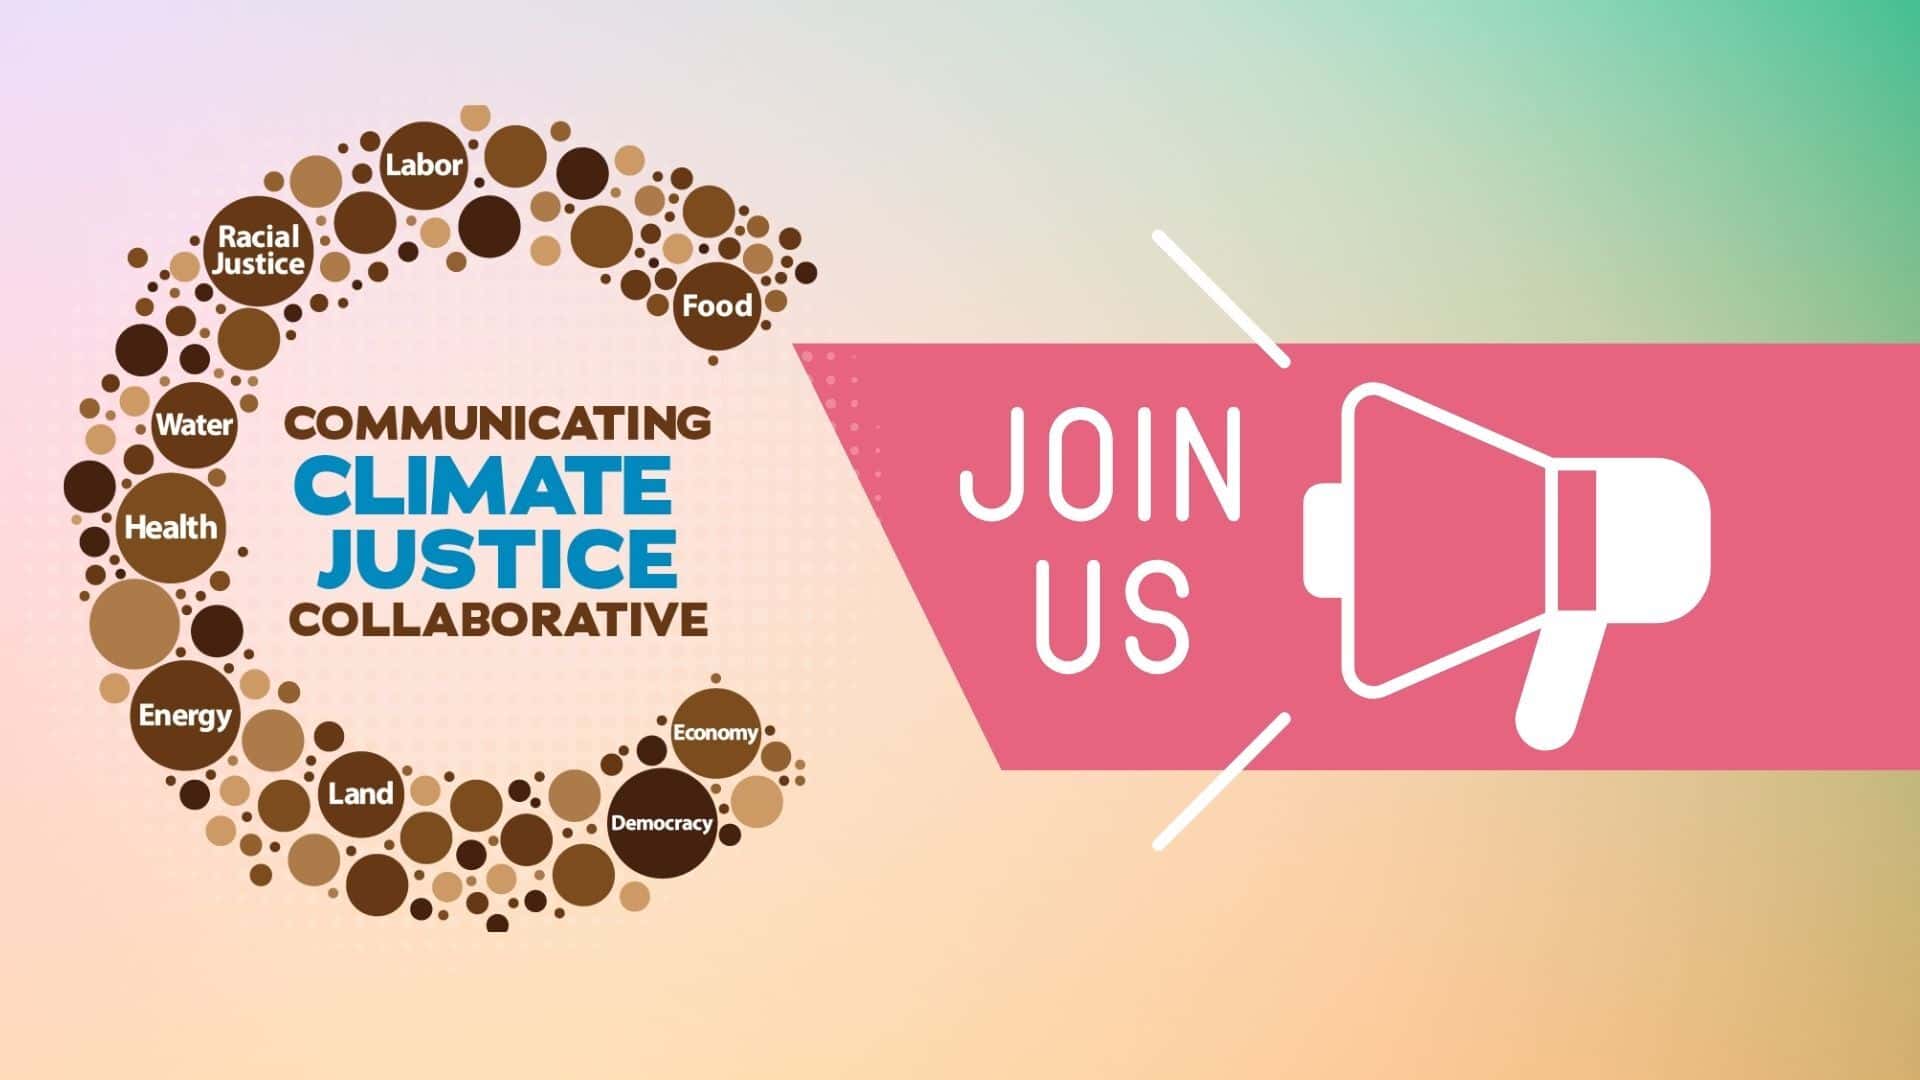 JoinThe Communicating Climate Justice Collaborative